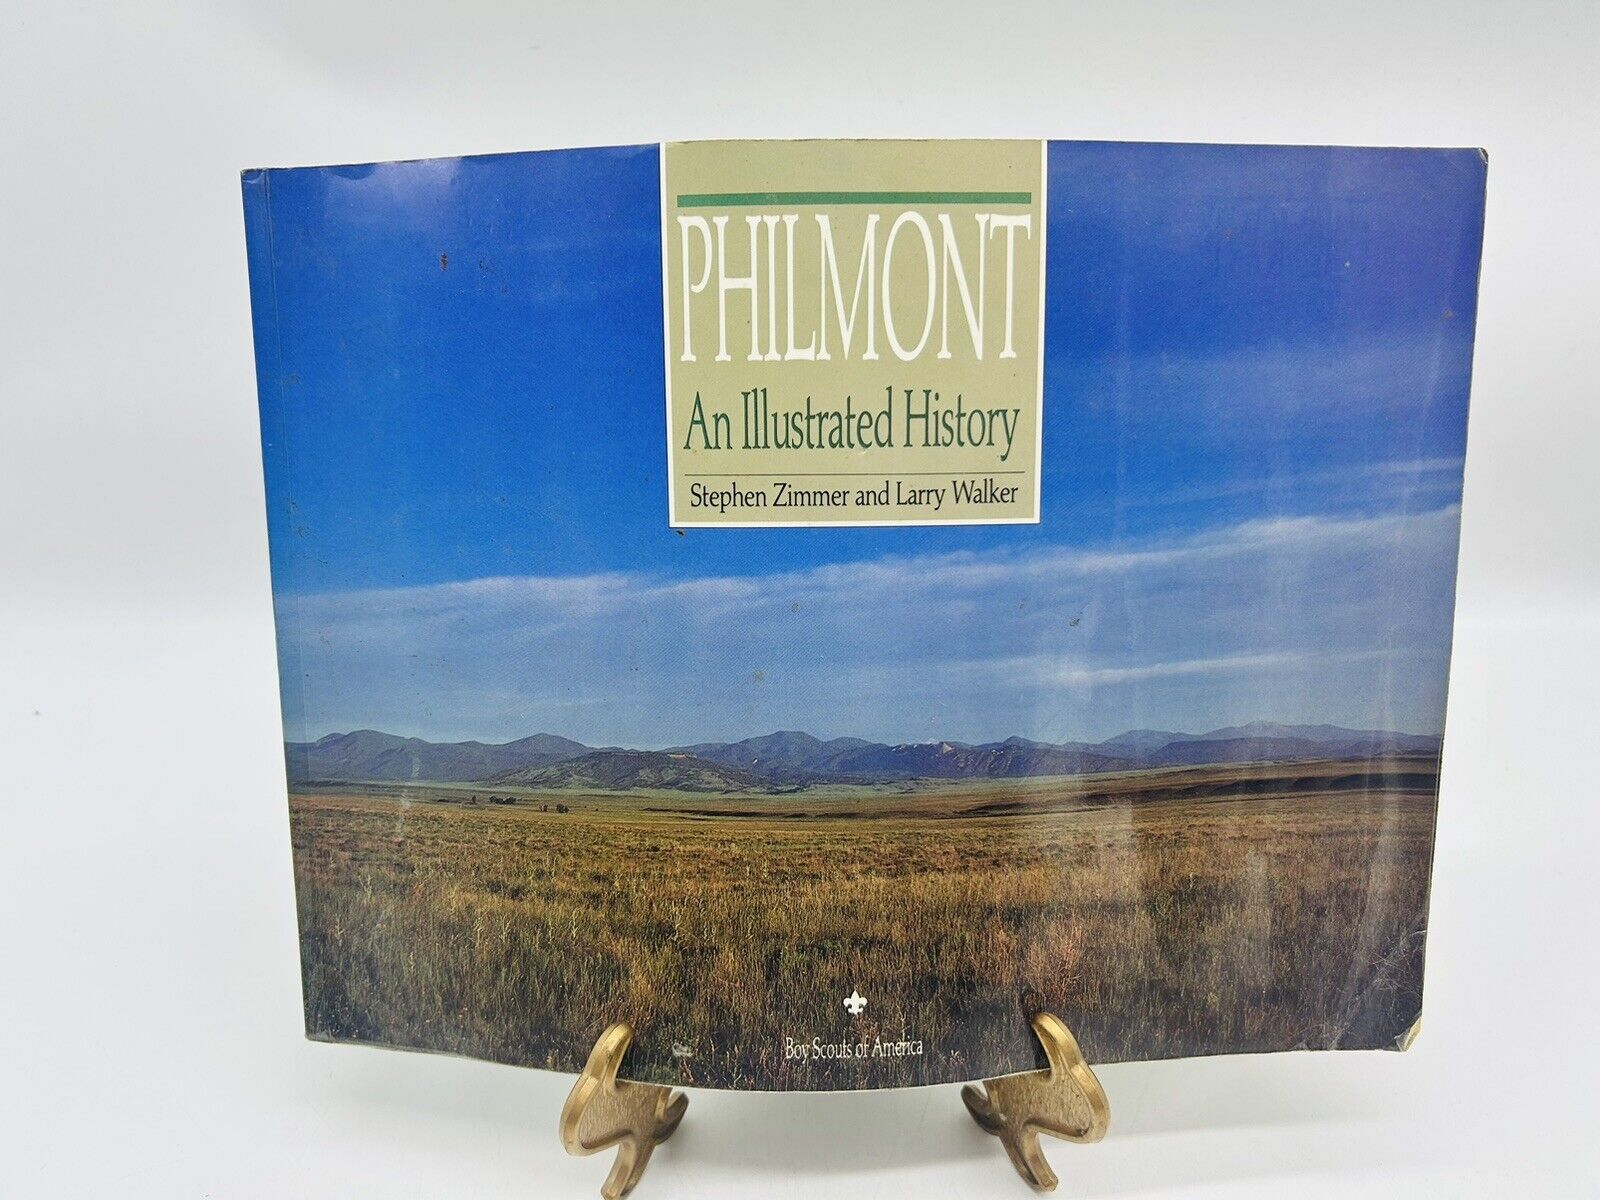 Philmont: An Illustrated History by Stephen Zimmer & Larry Walker First Edition